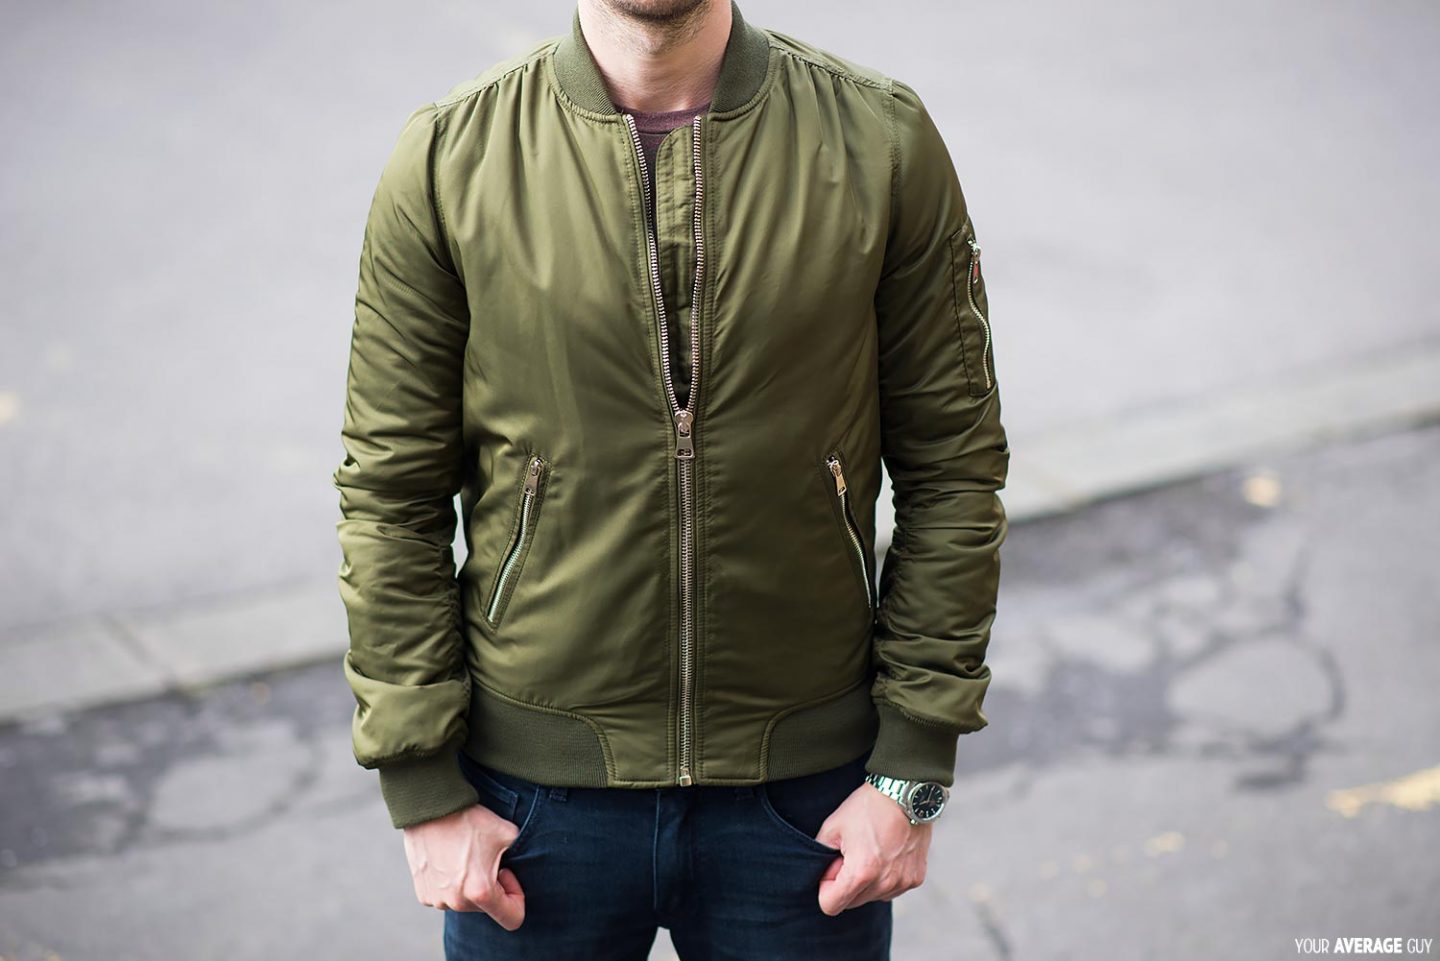 Topshop Tall MA1 Bomber Jacket For Men - Your Average Guy